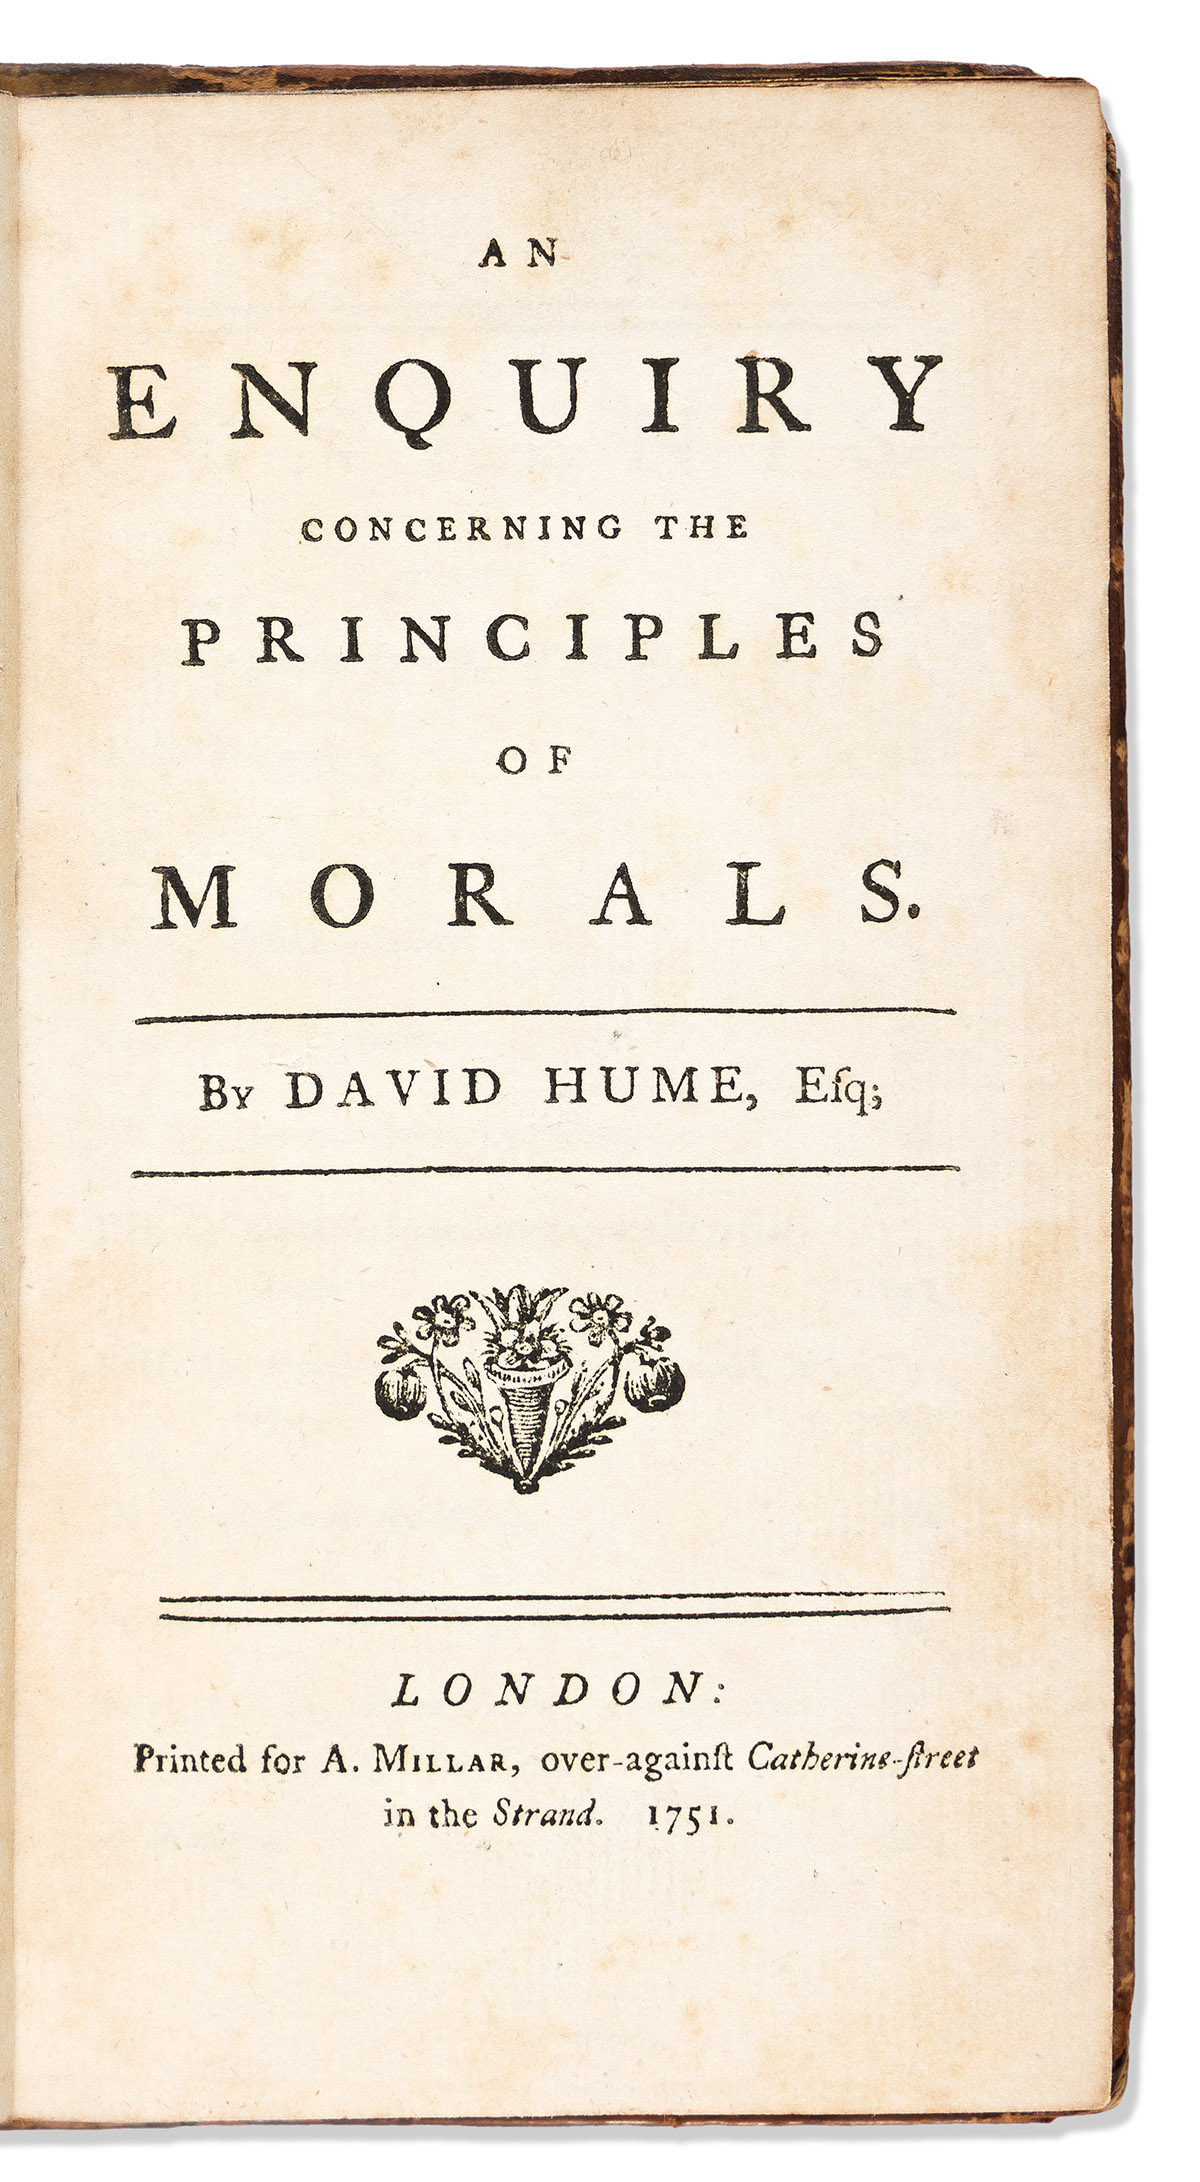 Hume, David (1711-1776) An Enquiry Concerning the Principles of Morals.